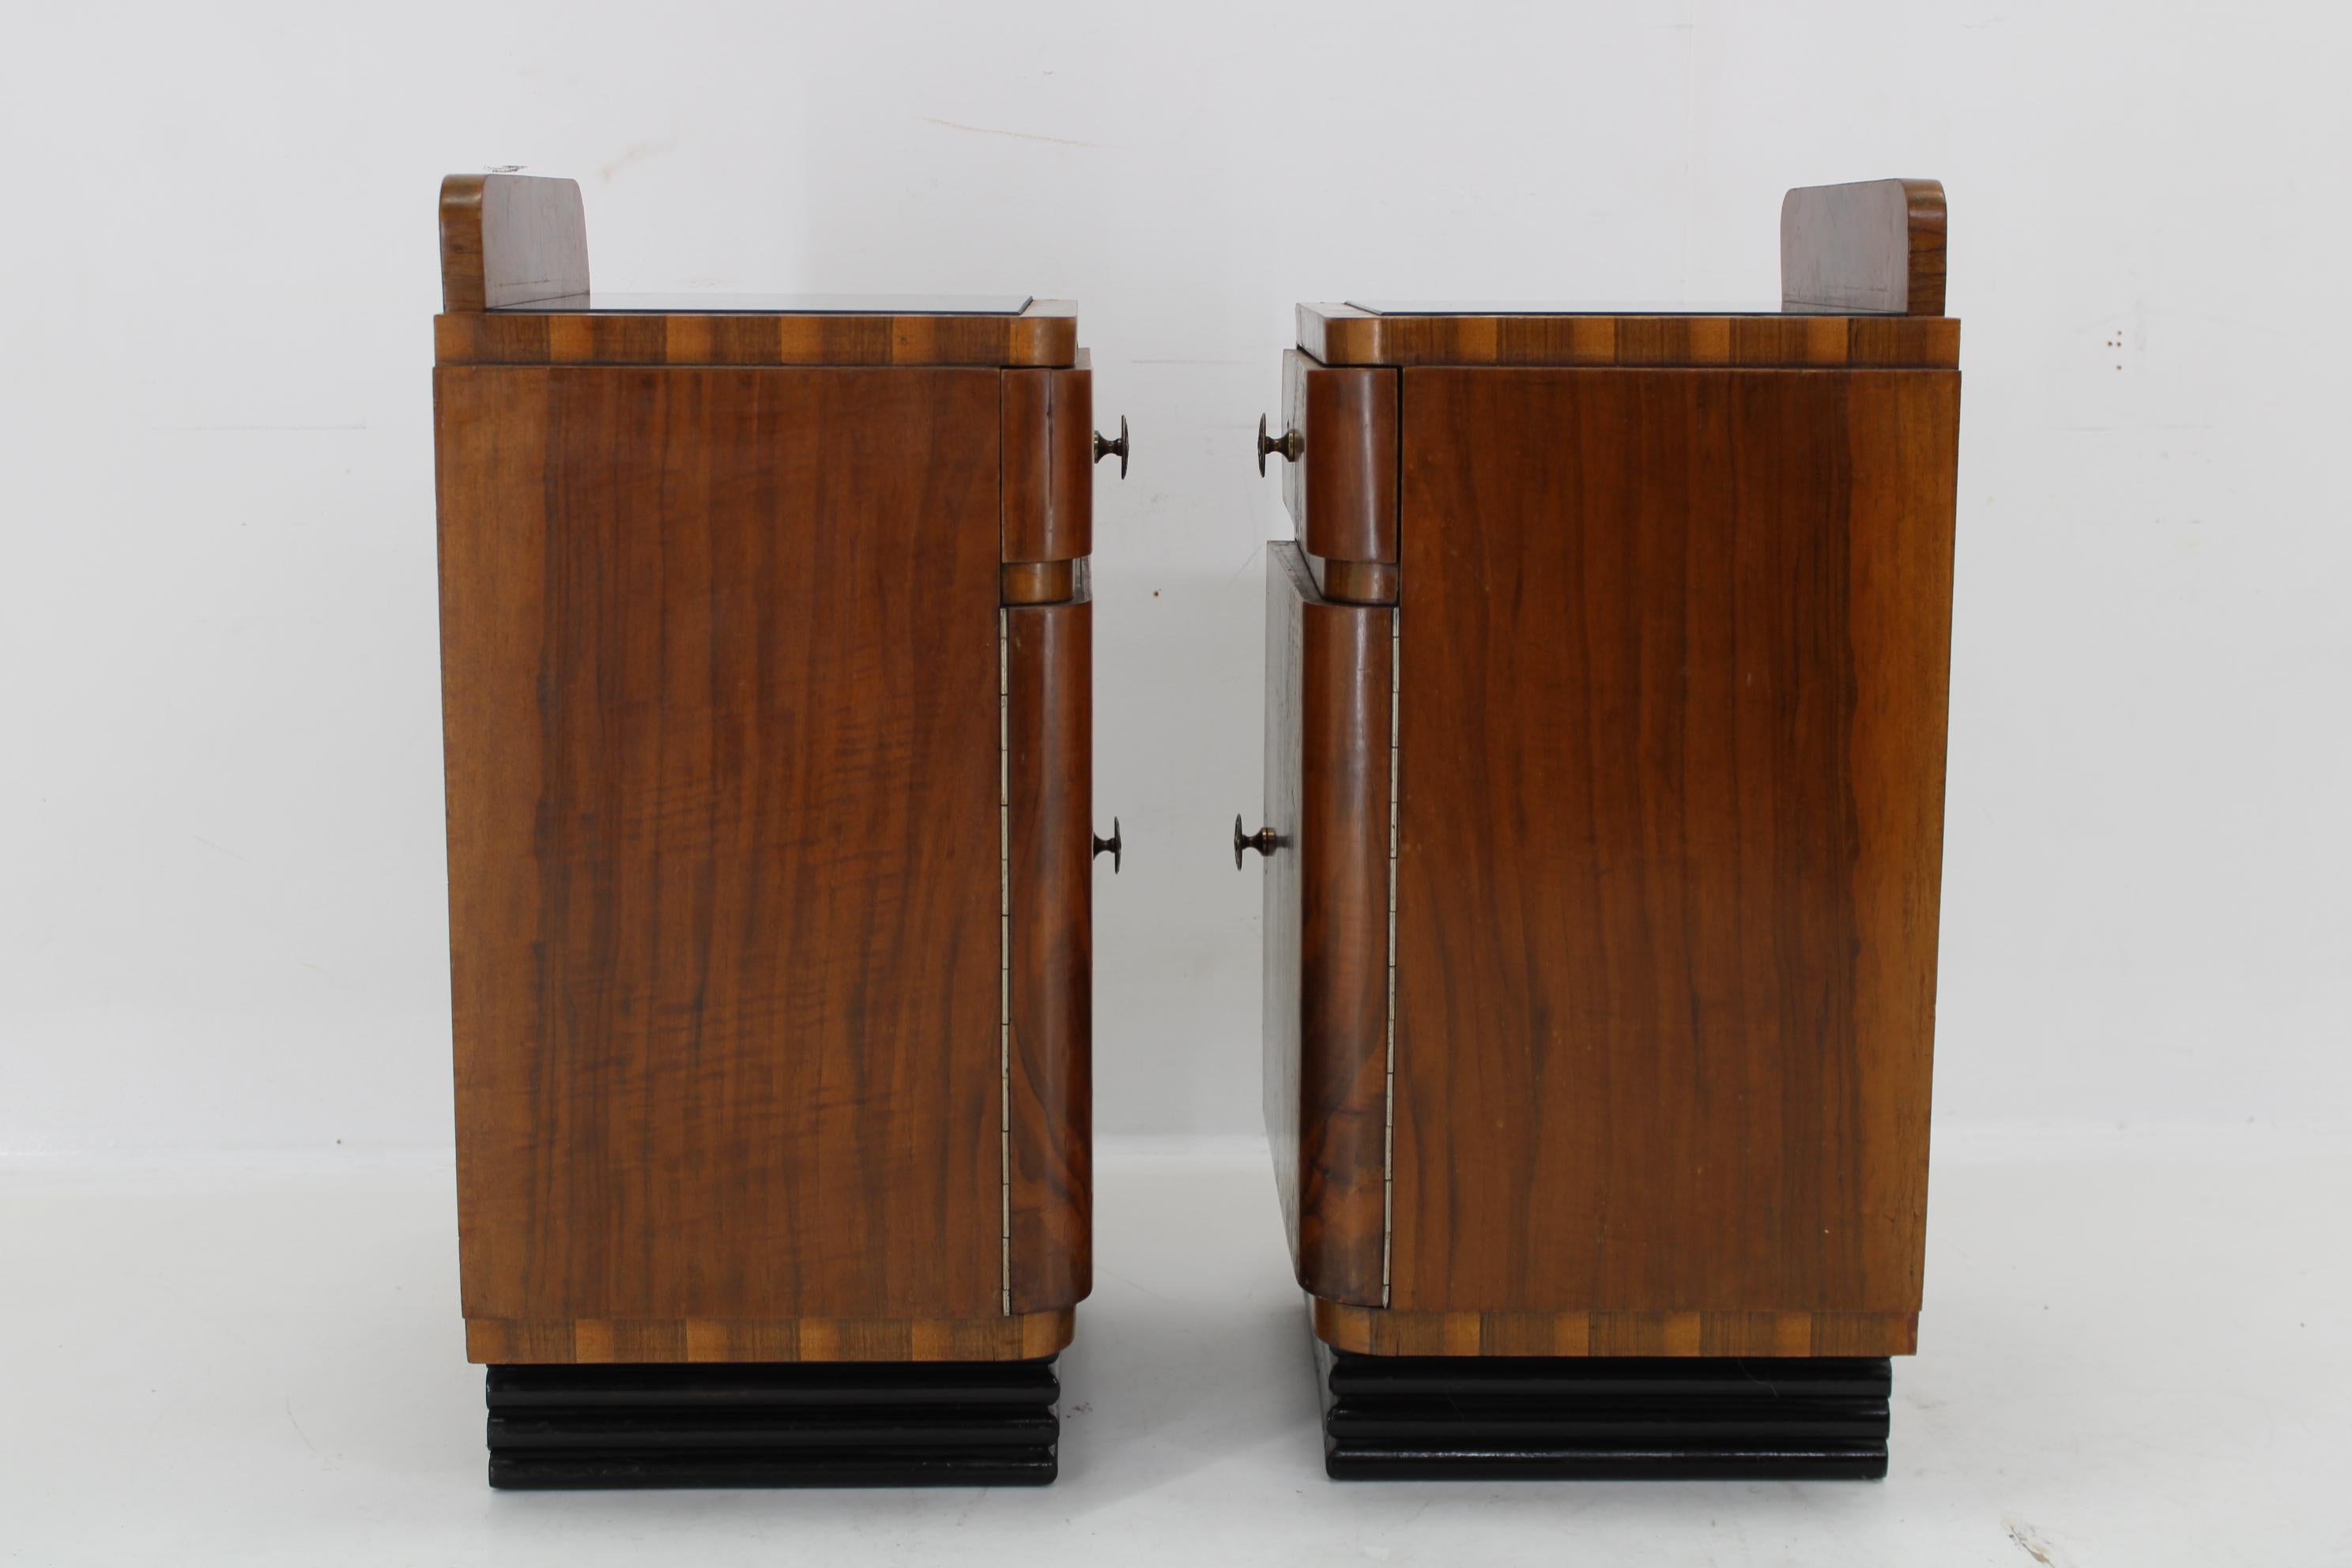 1940s Pair of Art Deco Nightstands in Walnut Finish, Italy For Sale 6